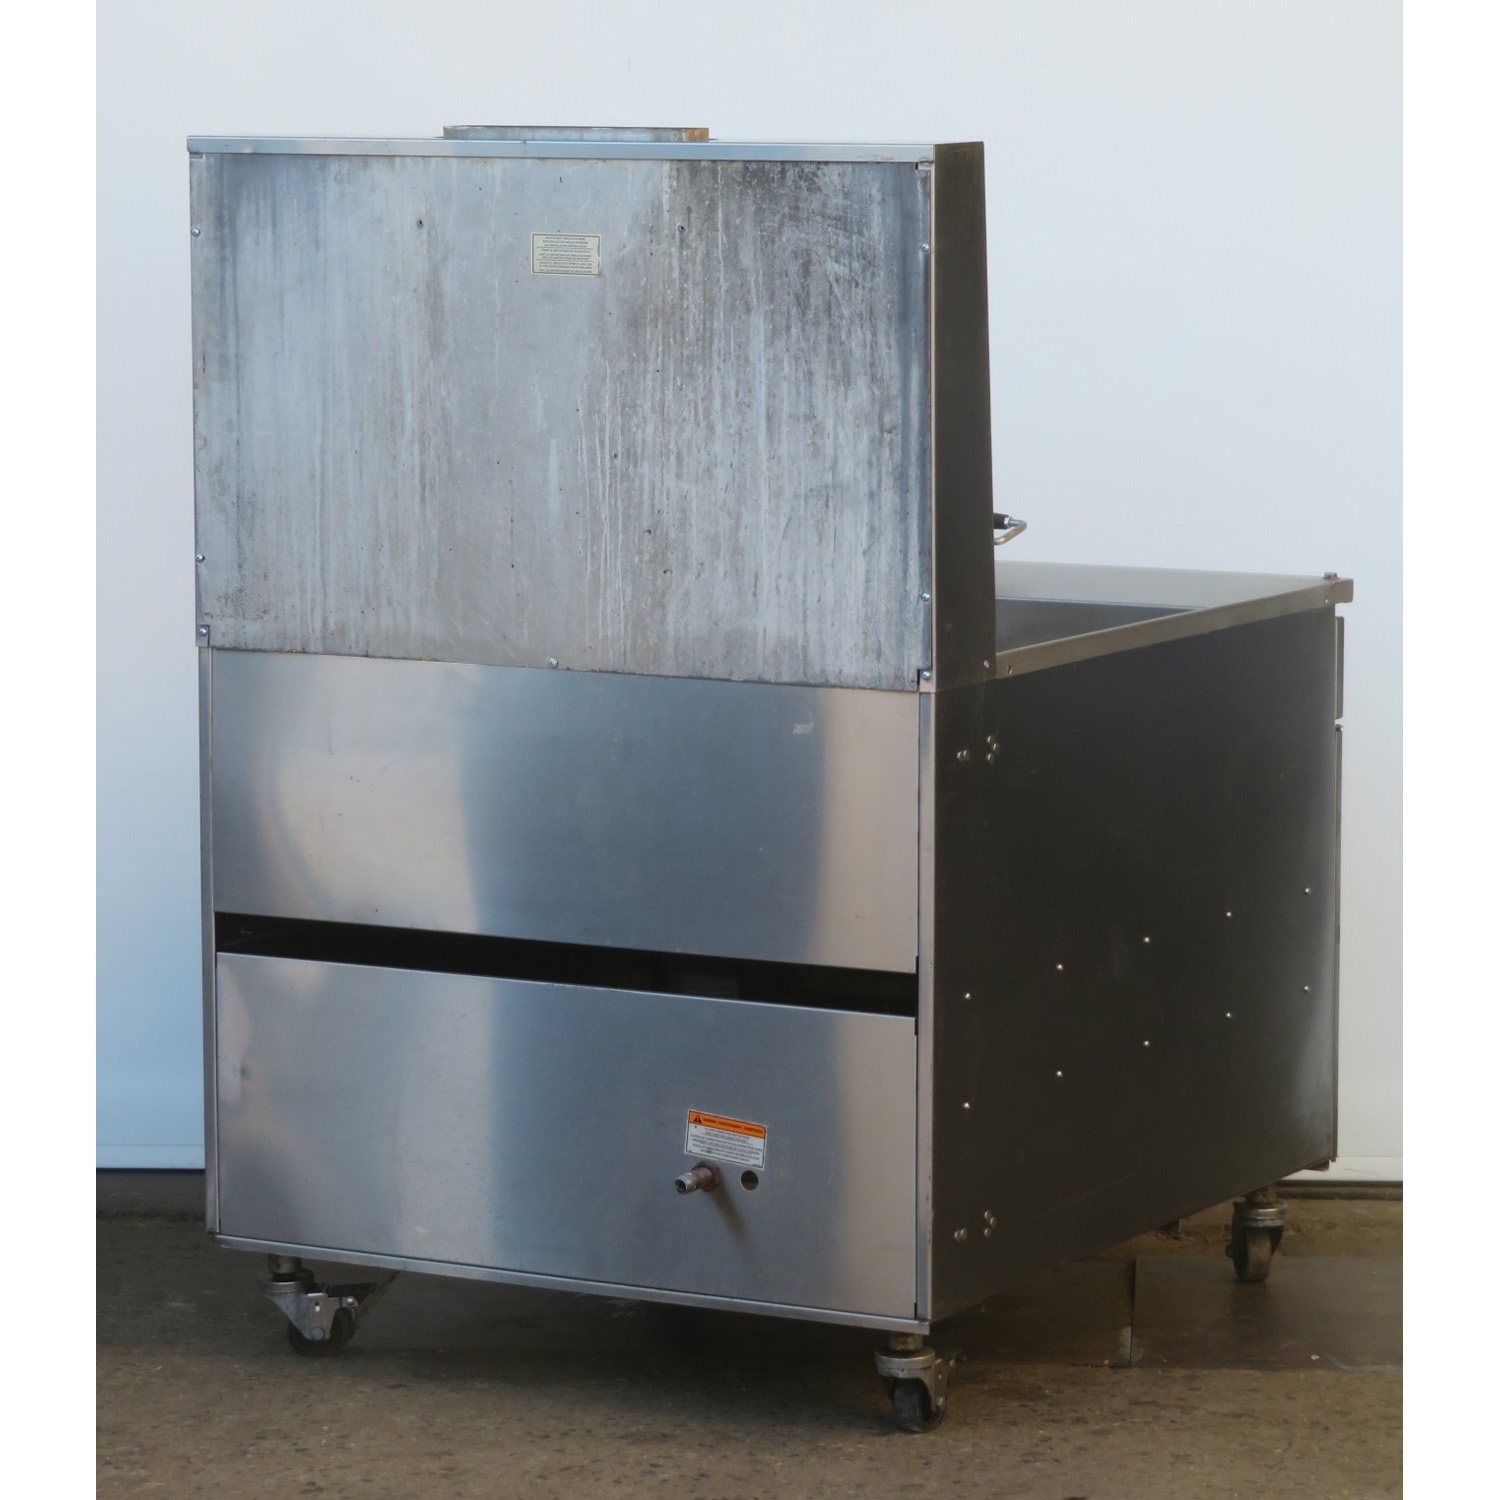 Pitco 34PSS Gas Donut Fryer, Used Excellent Condition image 4